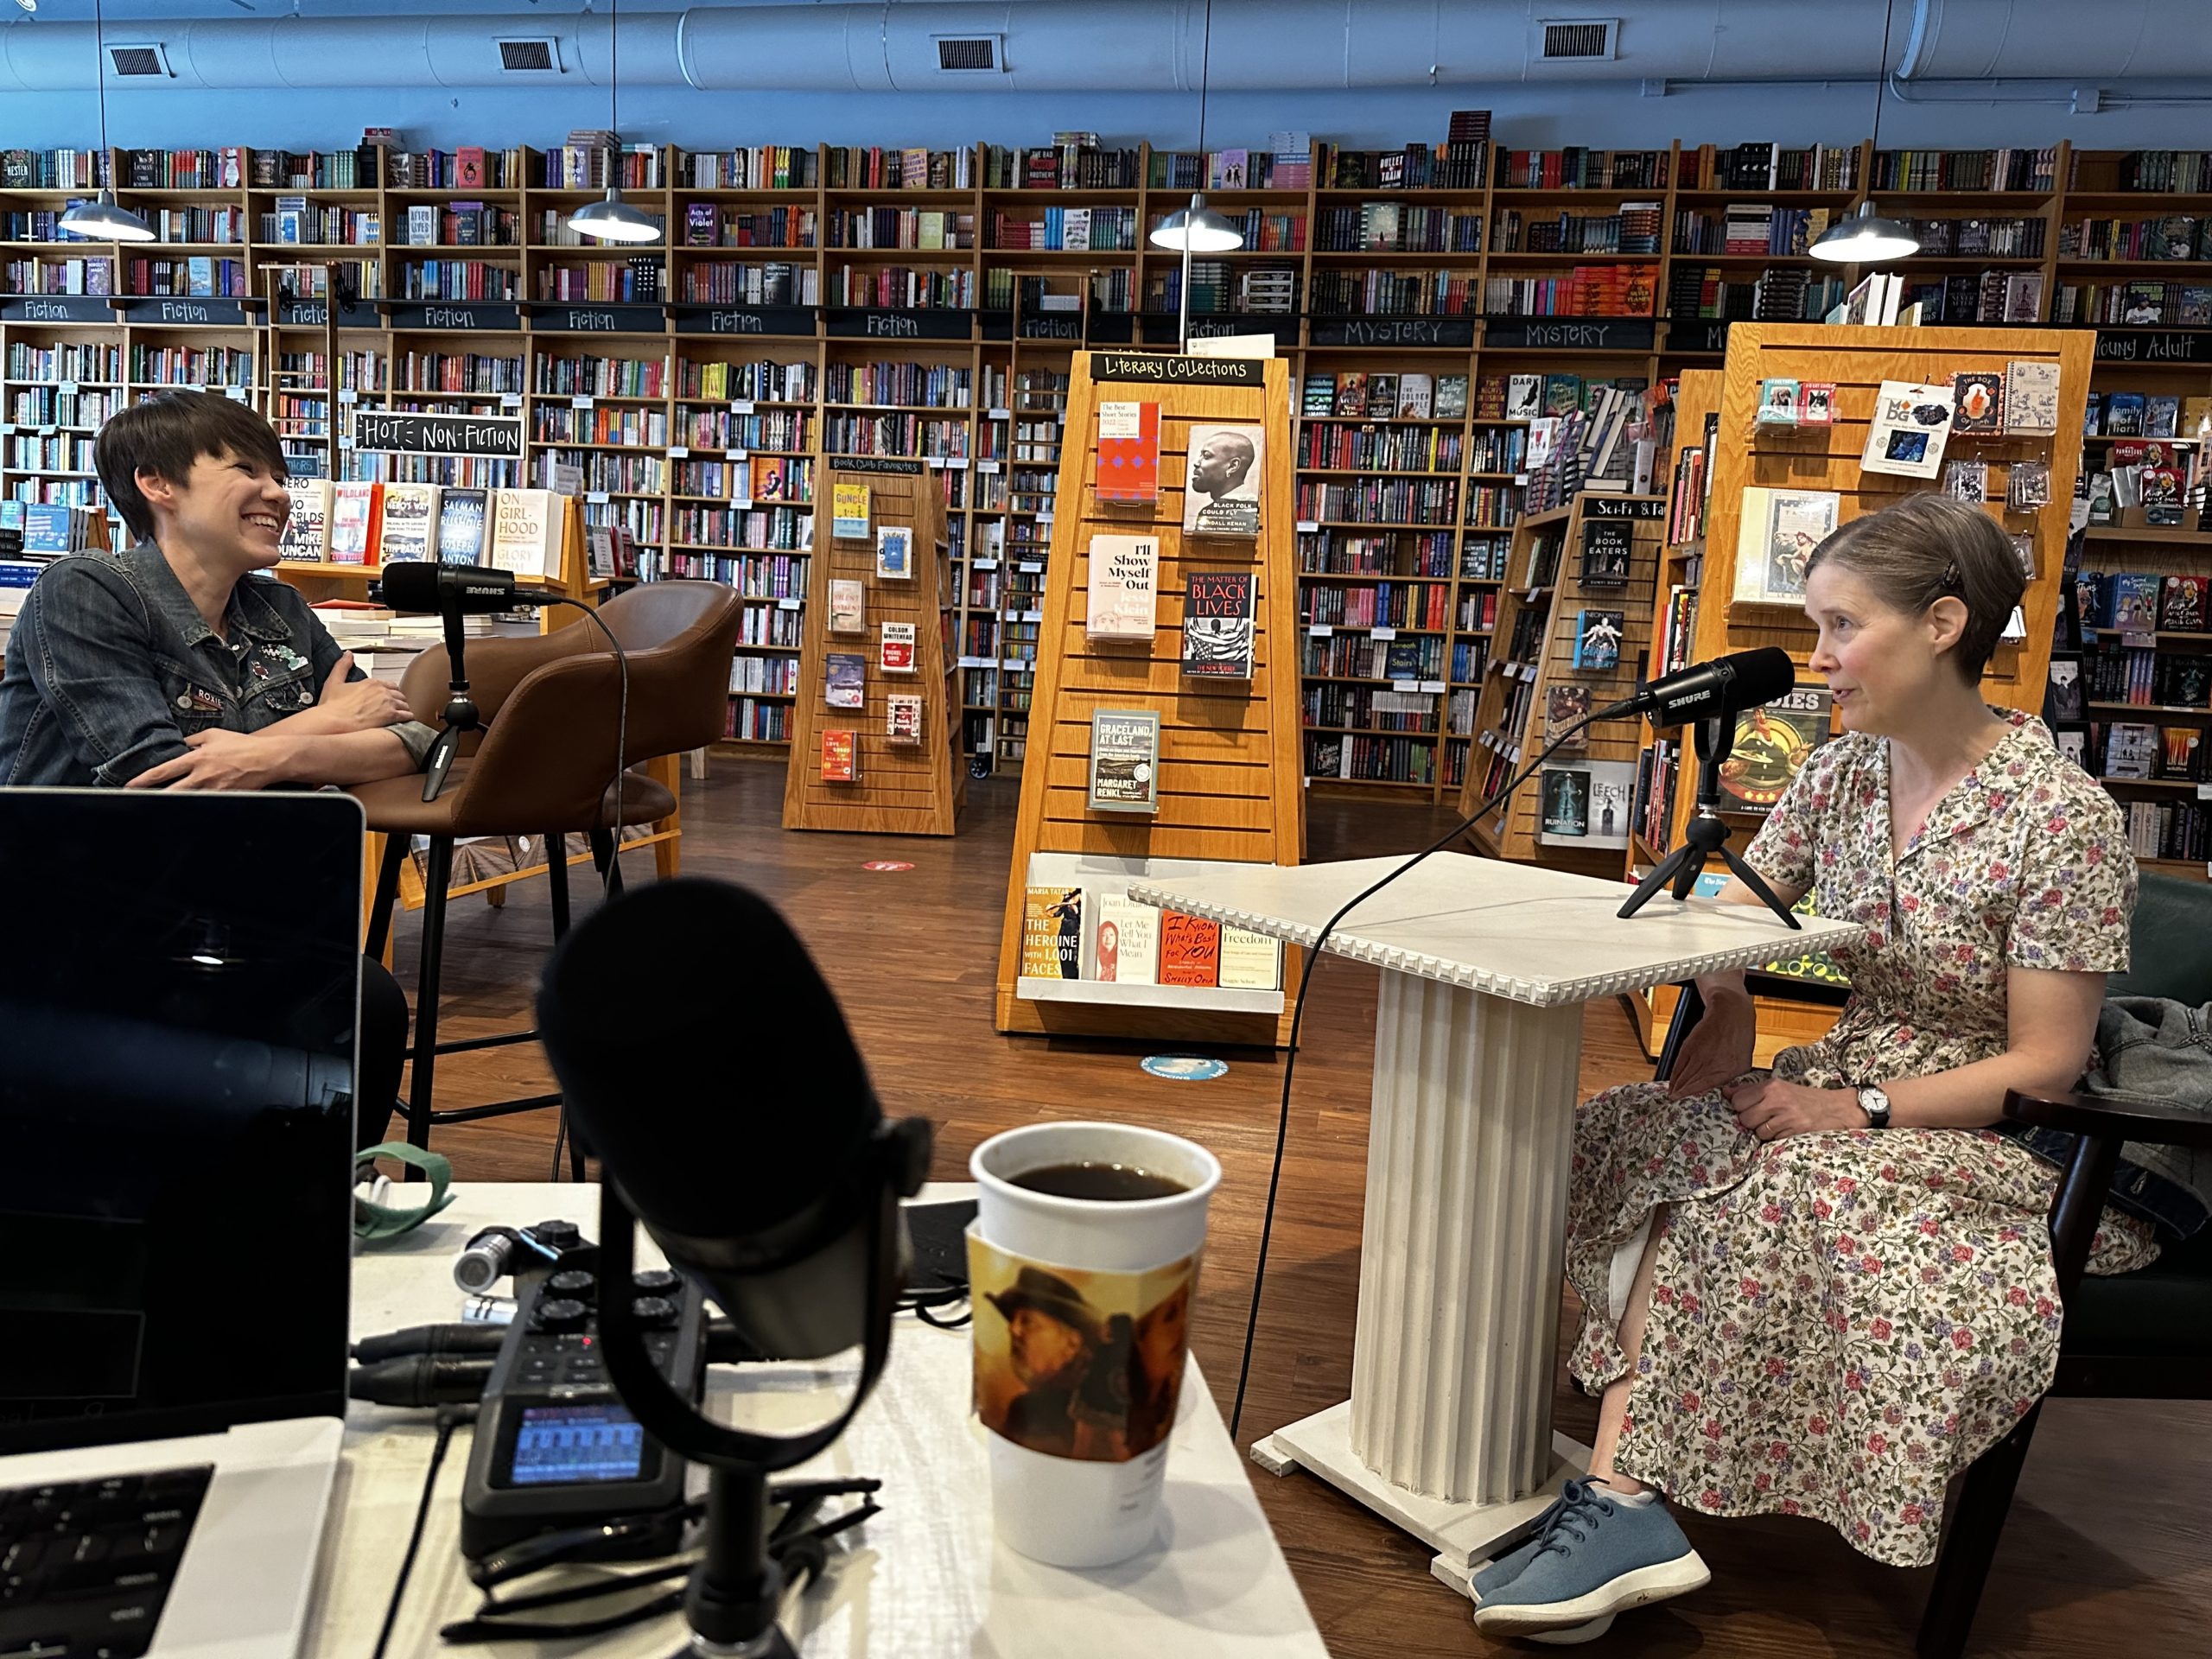 Libro.fm Podcast - Episode 09 “Interview with Ann Patchett” pic